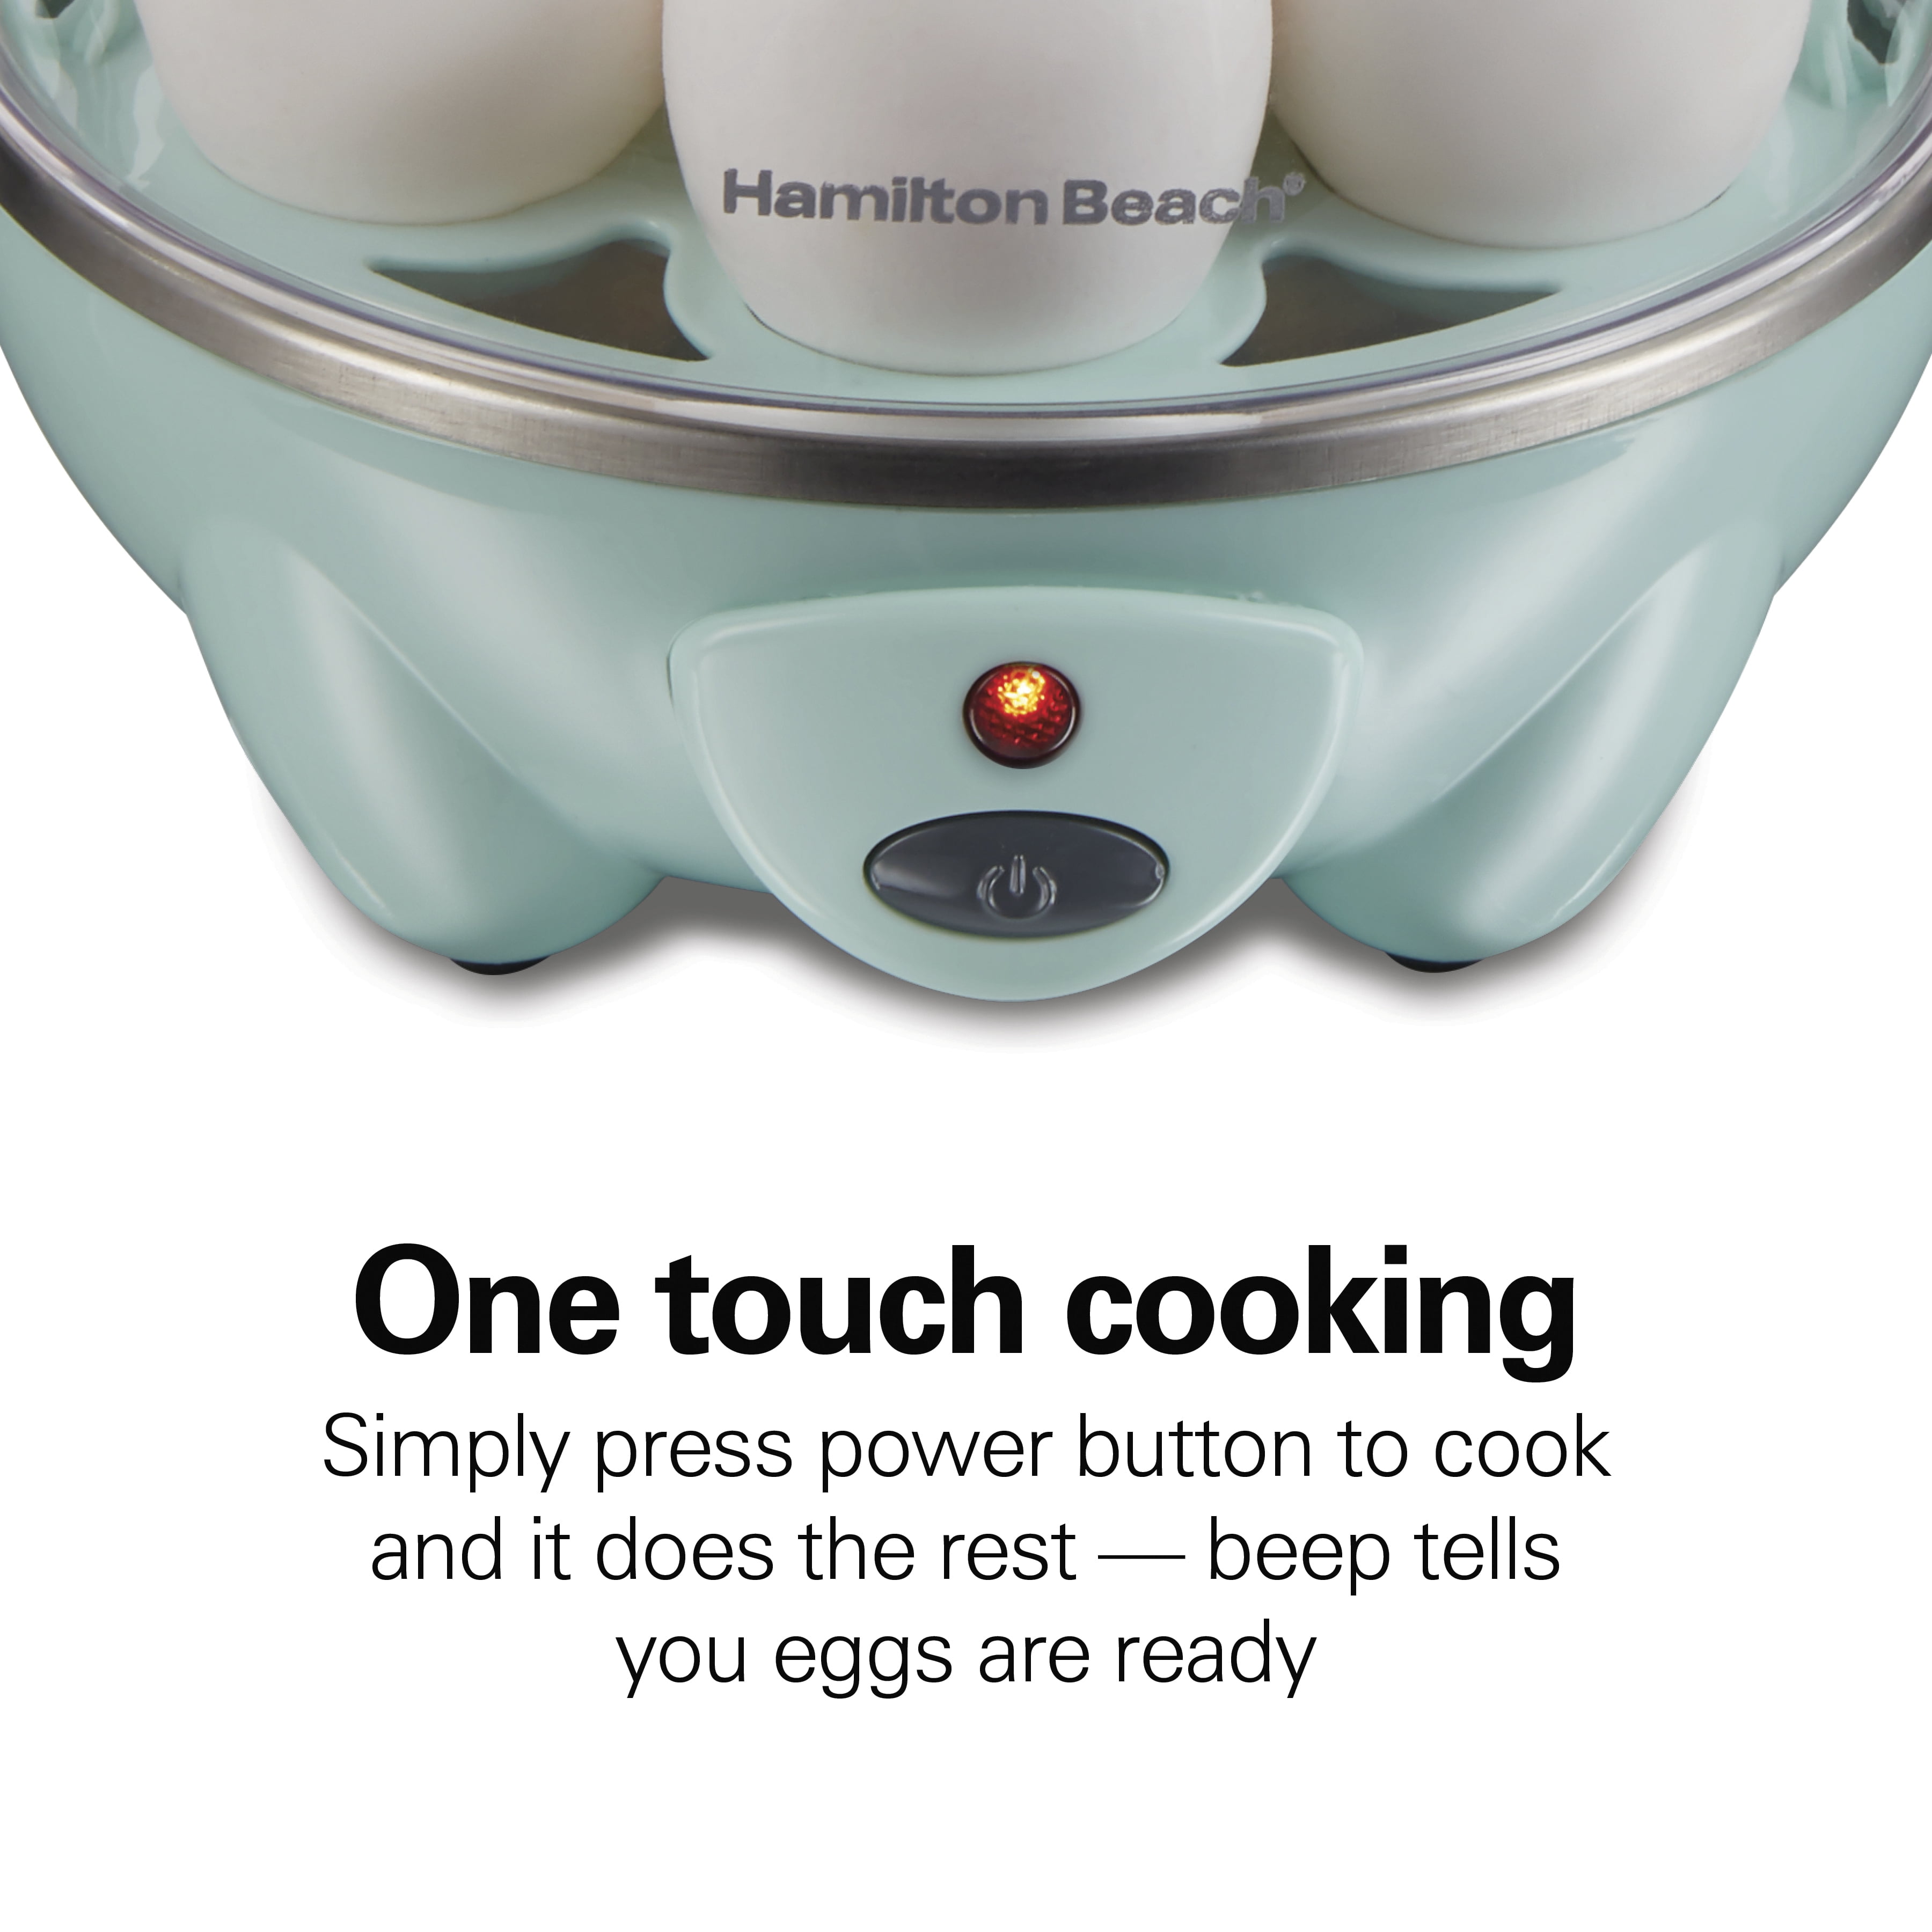 Hamilton Beach 25500 Timer Egg Cooker  Online Agency to Buy and Send Food,  Meat, Packages, Gift